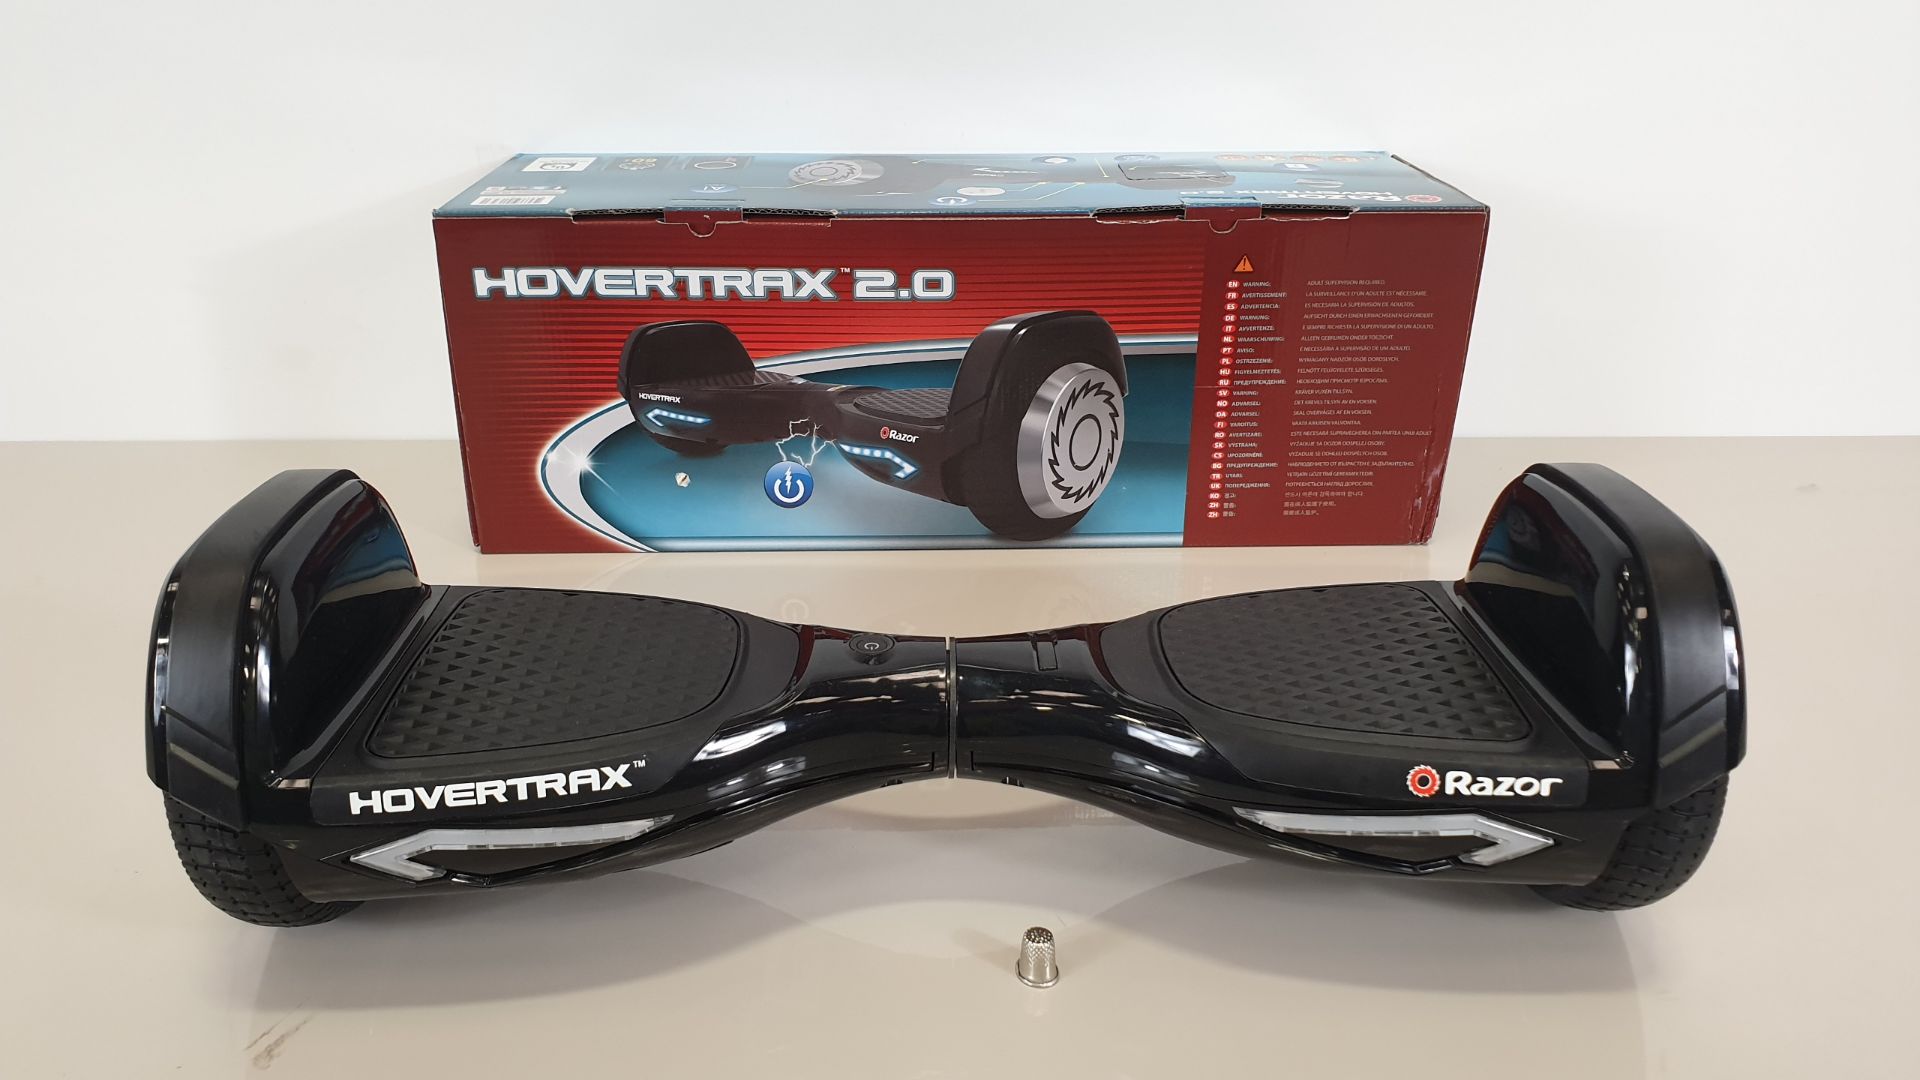 (LOT FOR THURSDAY 28TH MAY AUCTION) BRAND NEW BOXED RAZOR HOVERTRAX 2.0 ONYX BLACK 9KMH (PLEASE NOTE